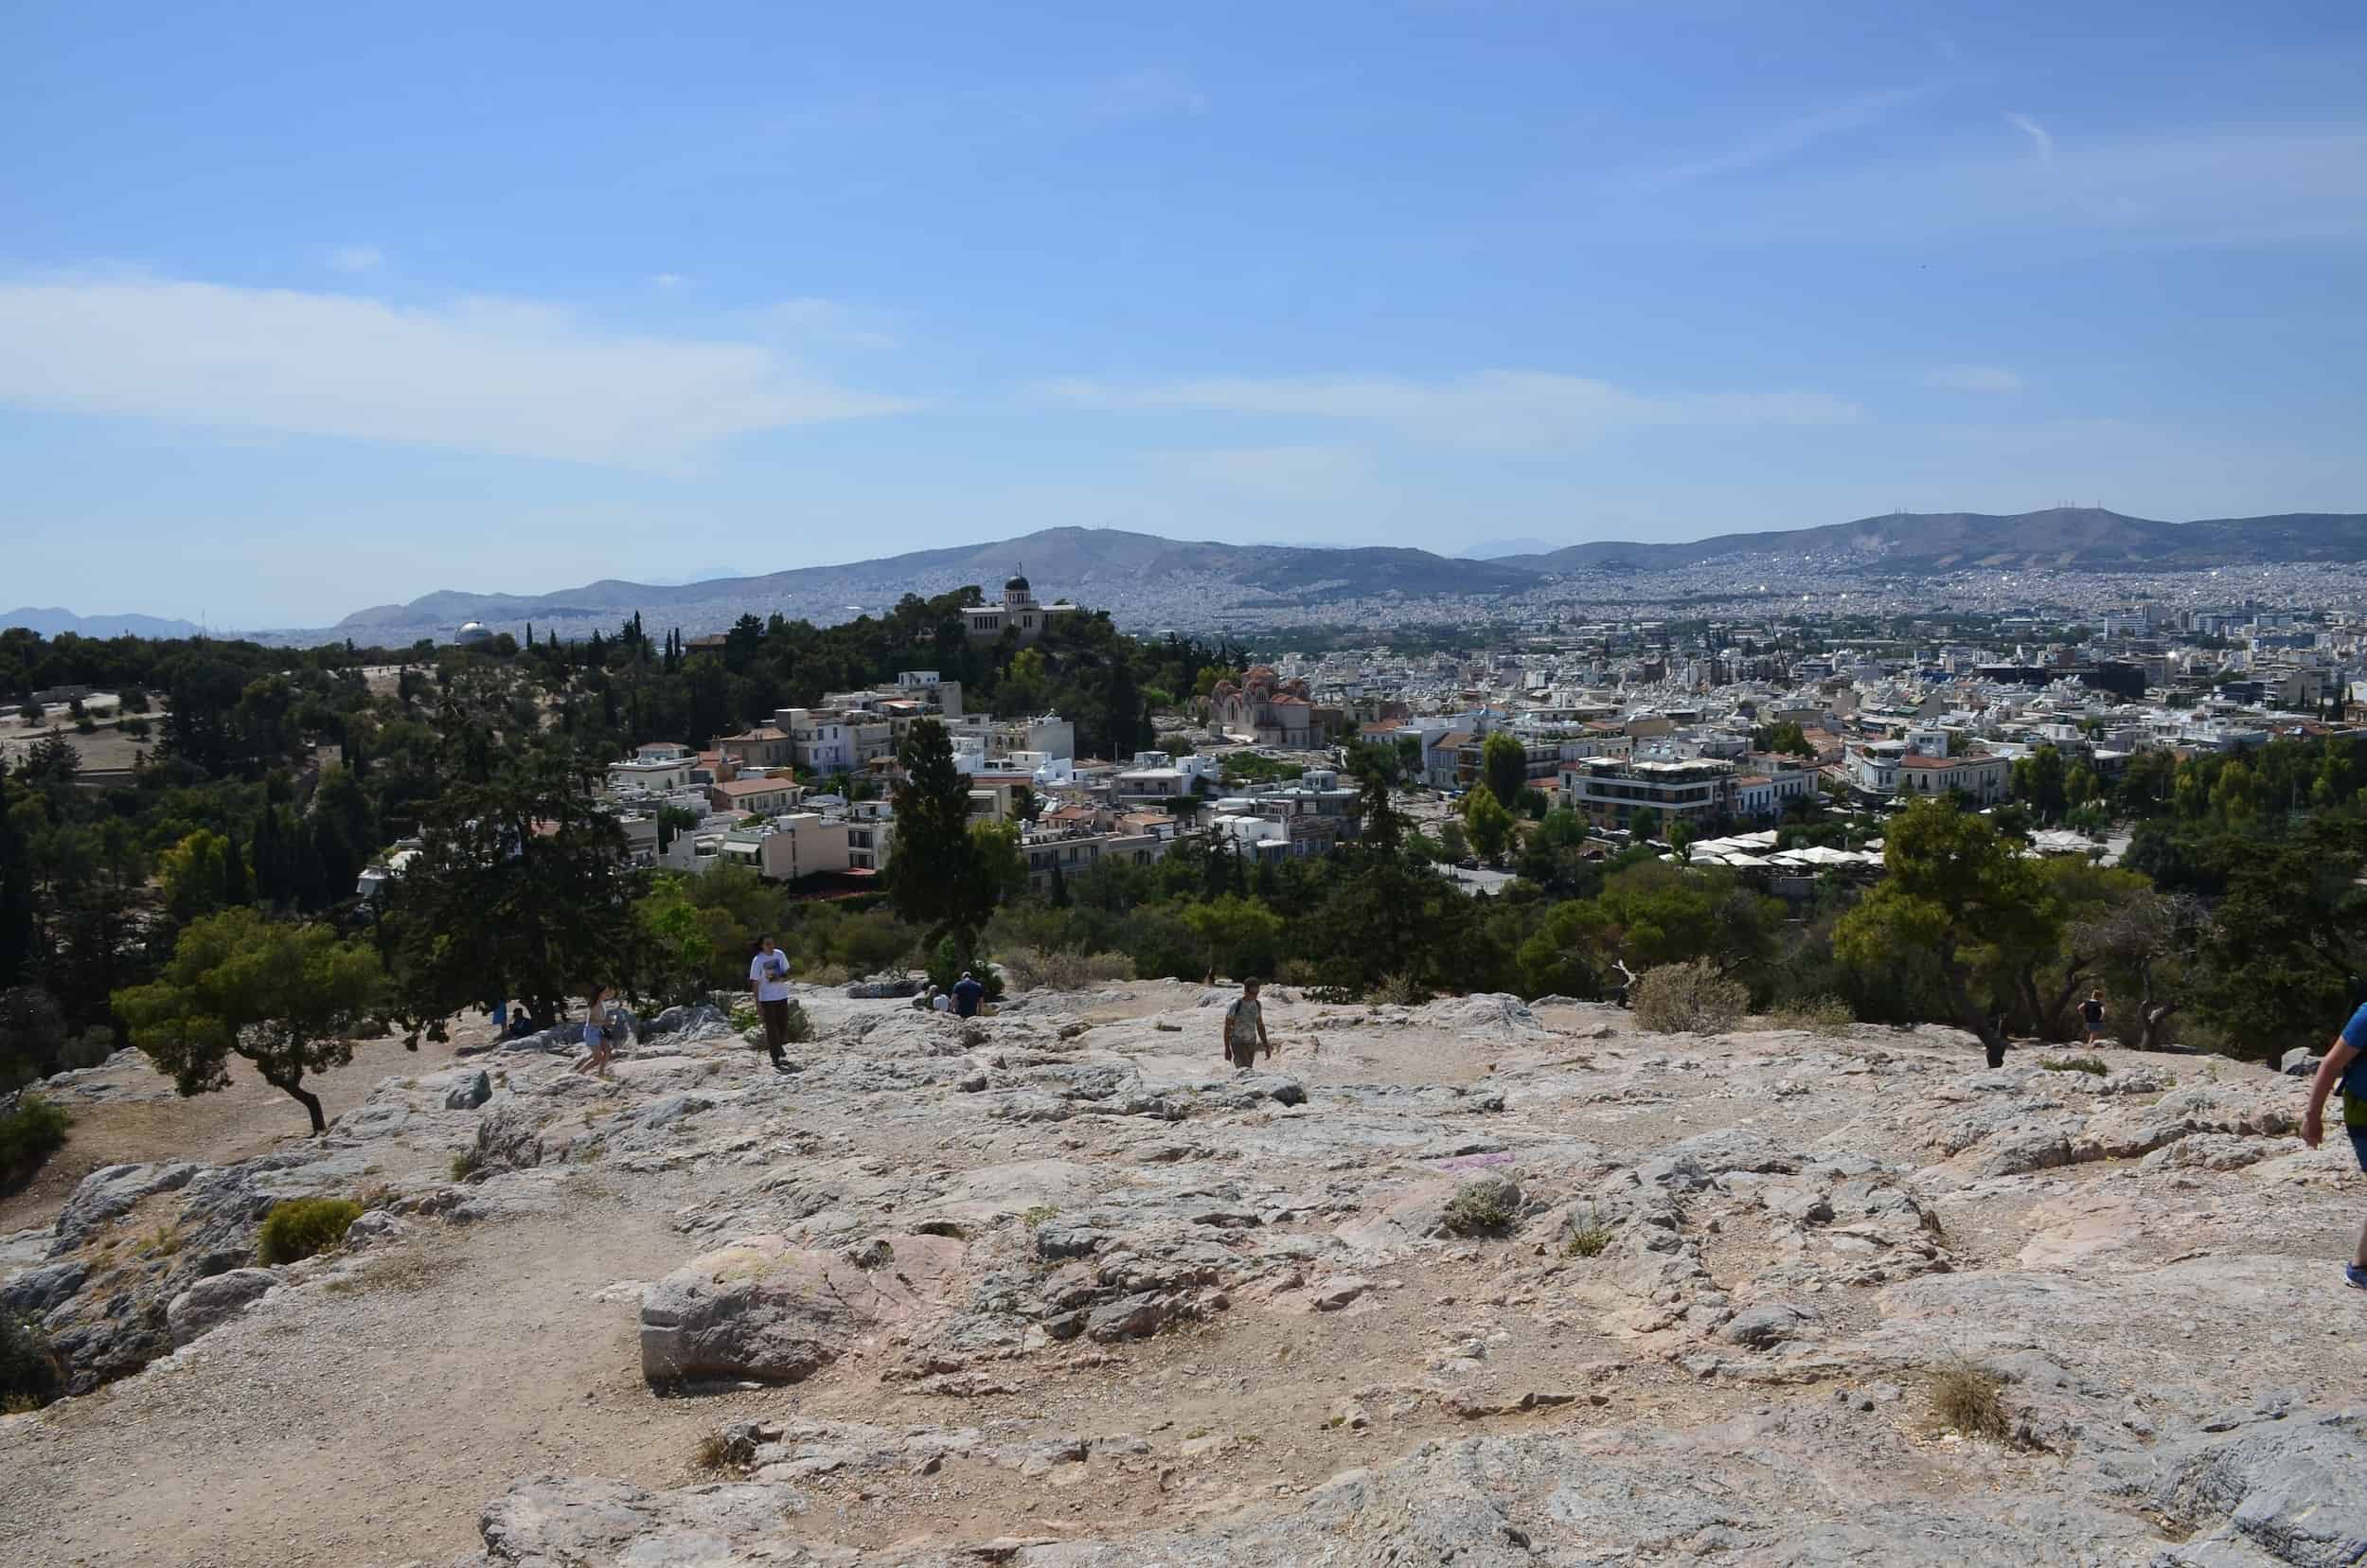 Looking west from Areopagus in Athens, Greece